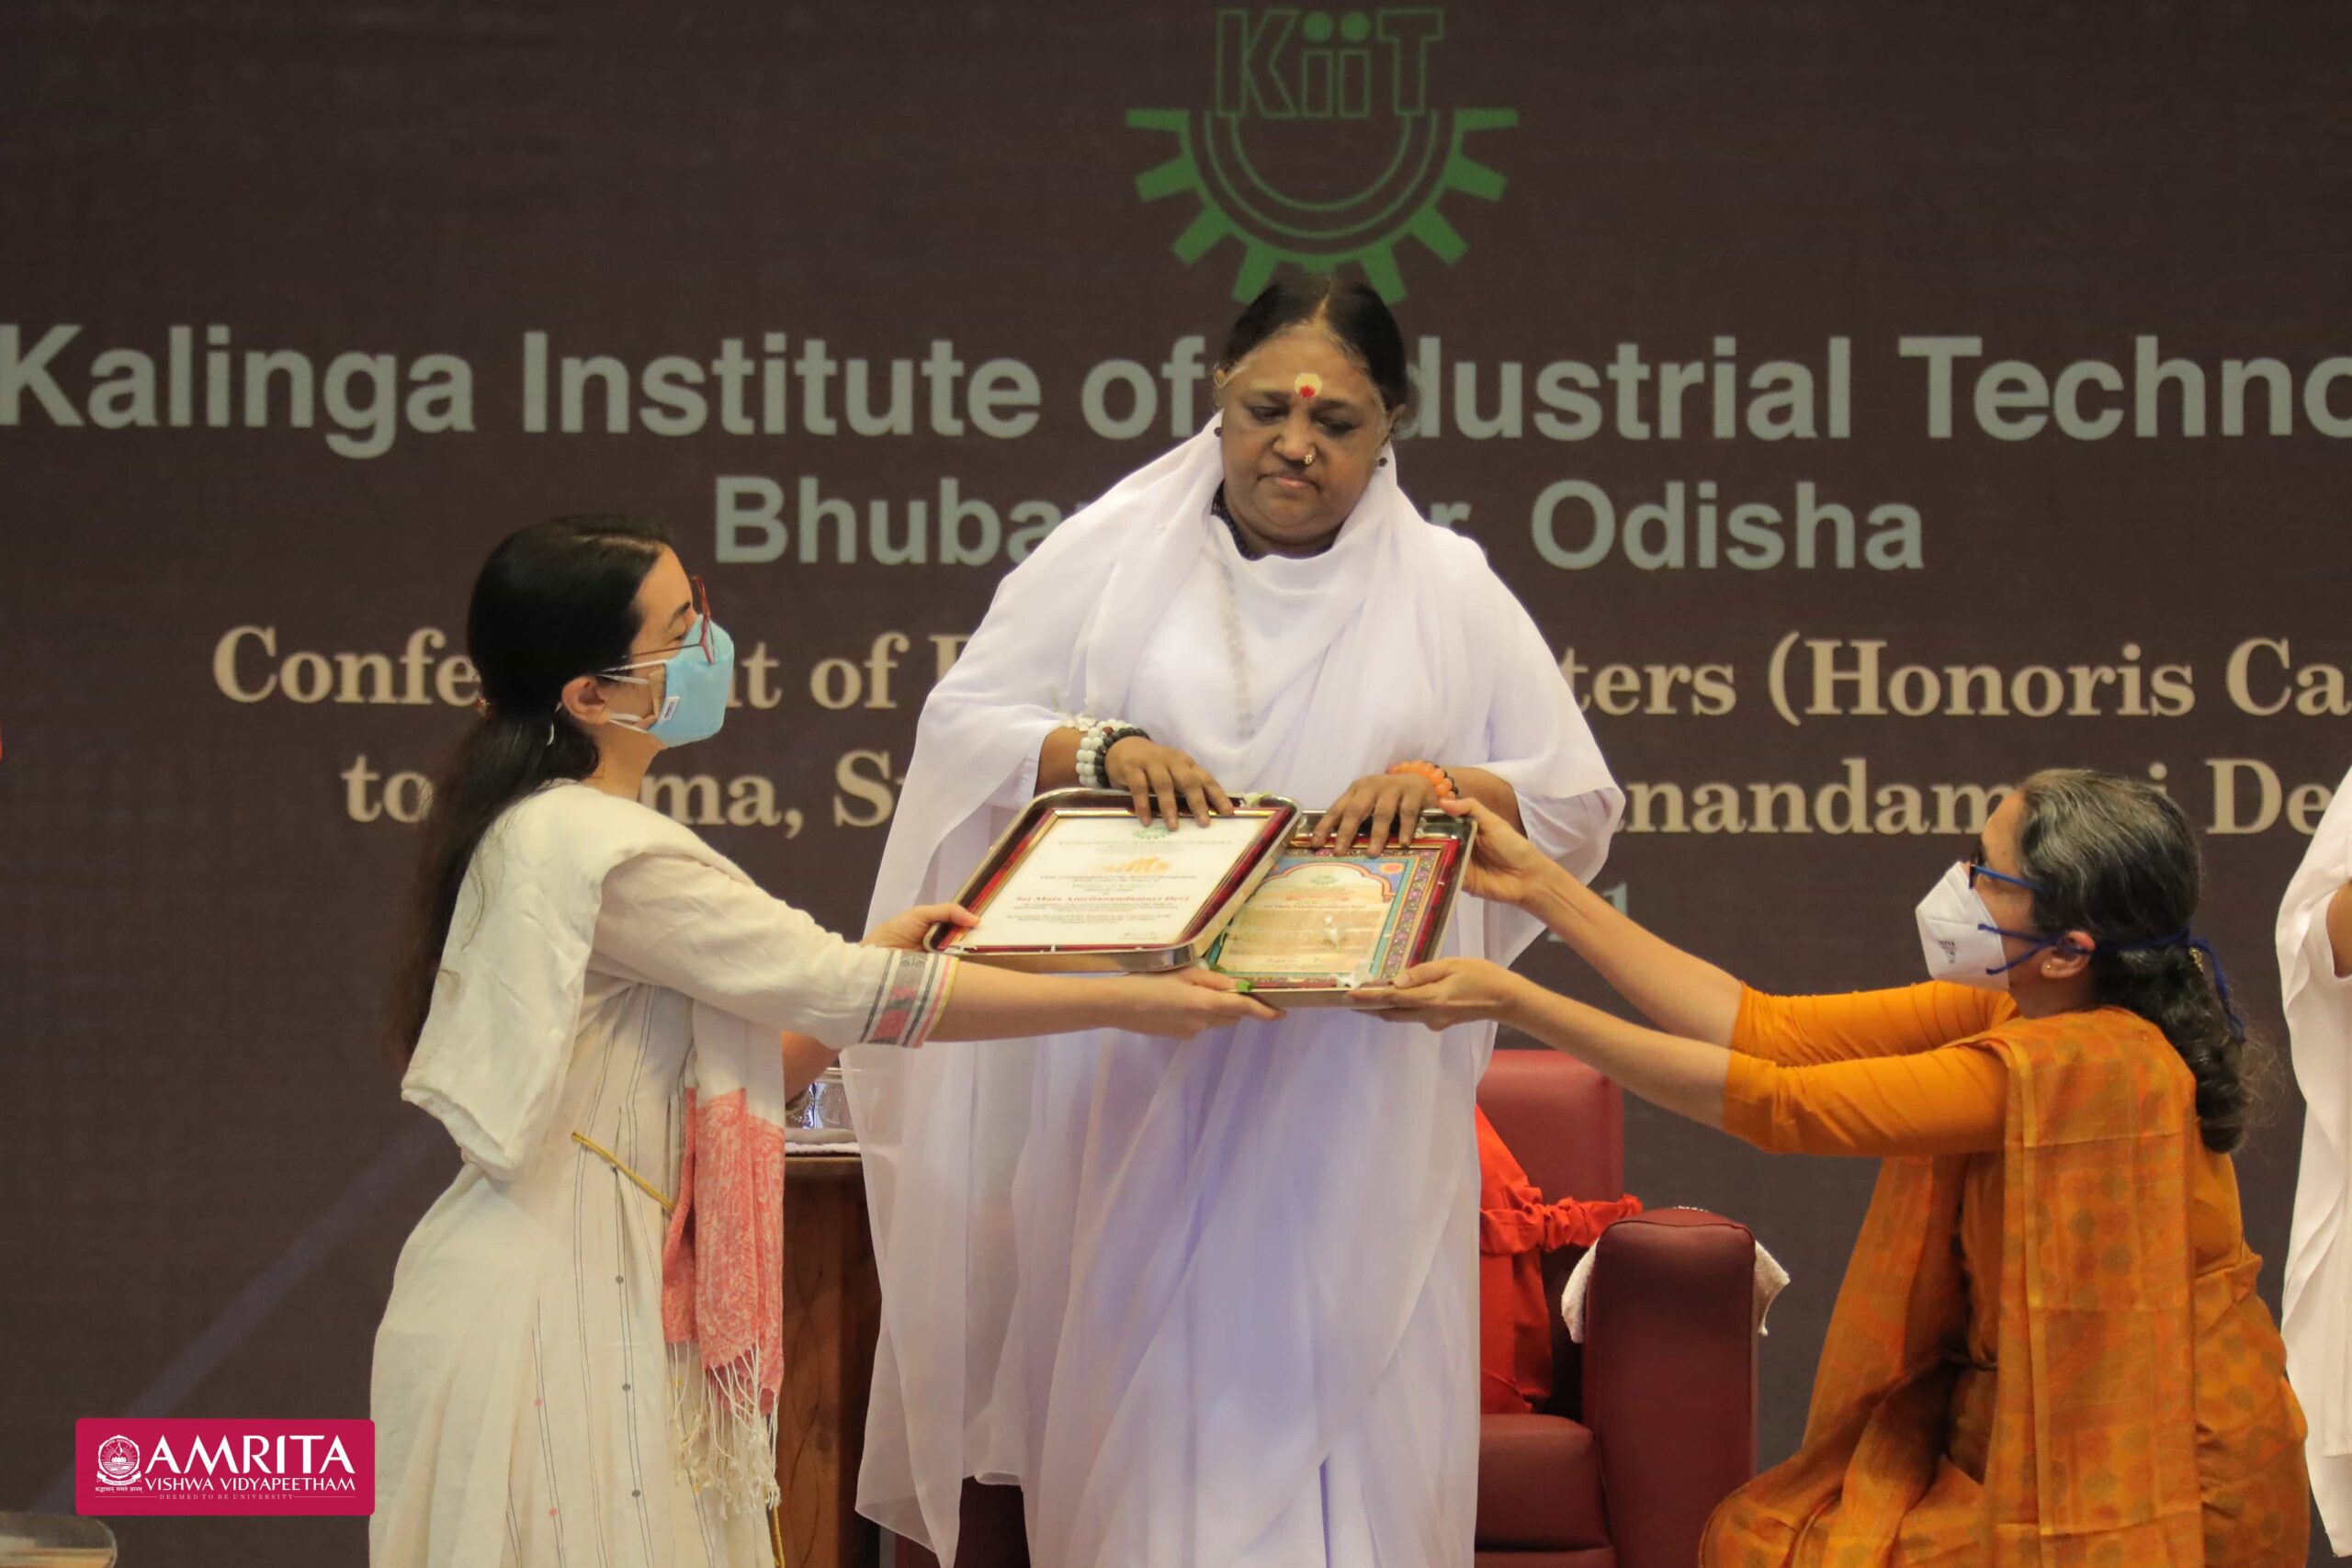 Amma receives Doctorate award while standing with presenters.